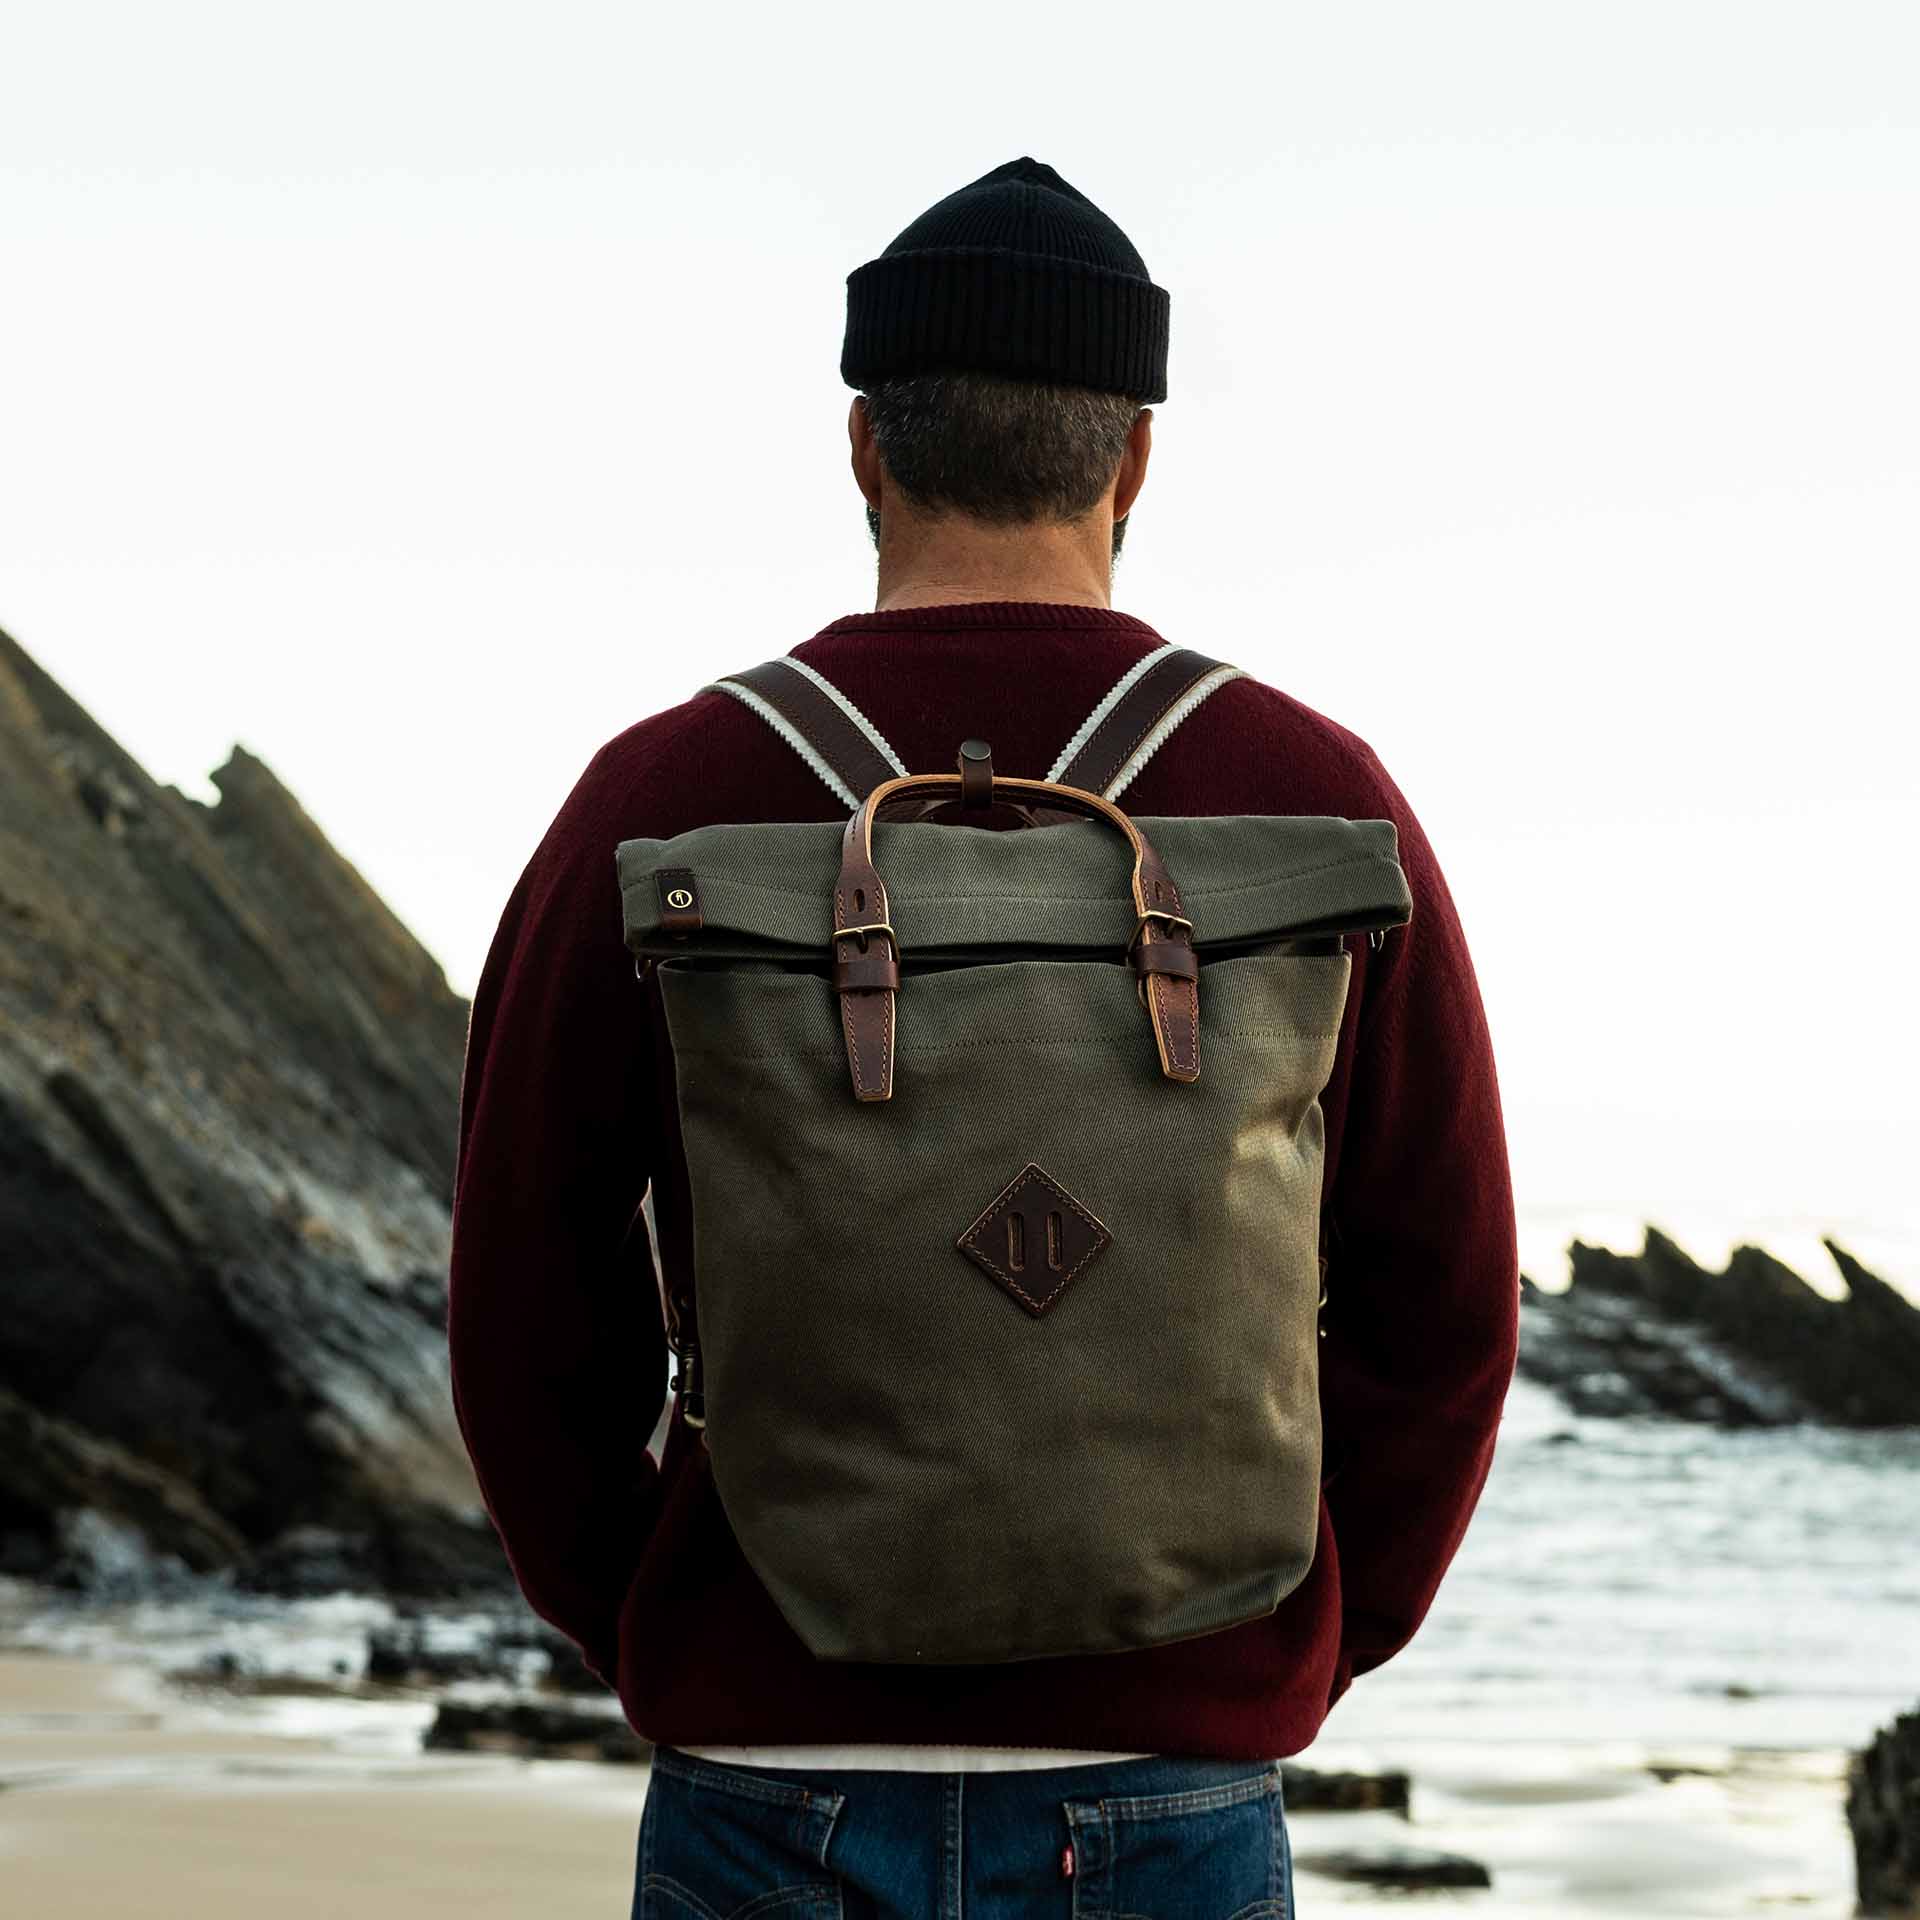 A man carries Woody's backpack on a beach